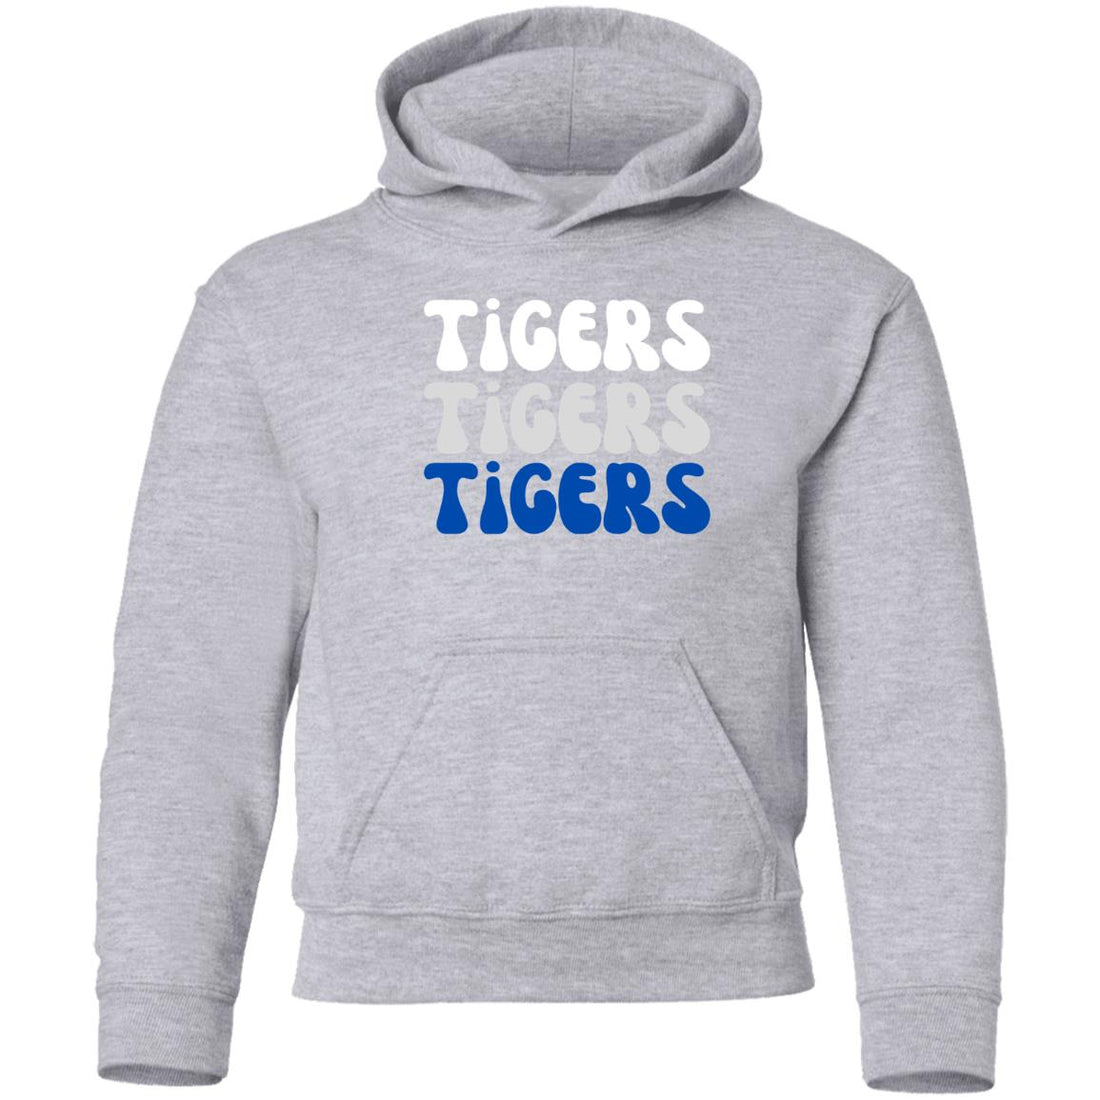 St. John/Hudson Tigers Youth Hoodies - Positively Sassy